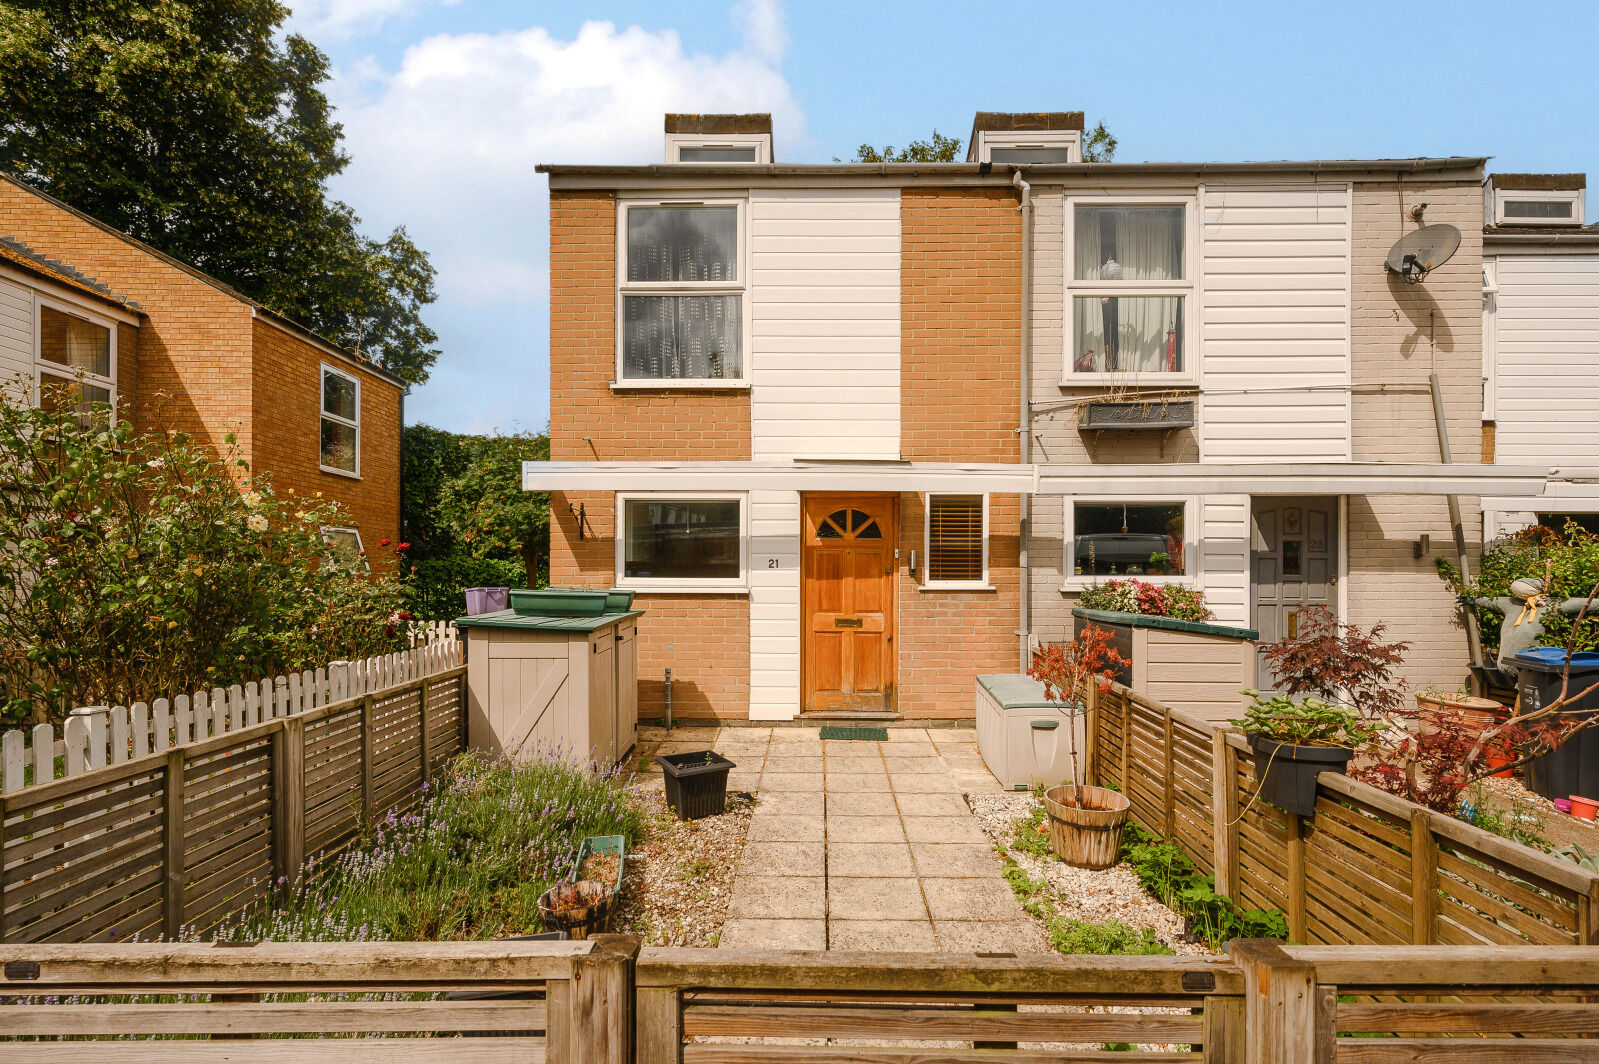 2 bedroom end terraced house for sale Willmore End, Wimbledon, SW19, main image